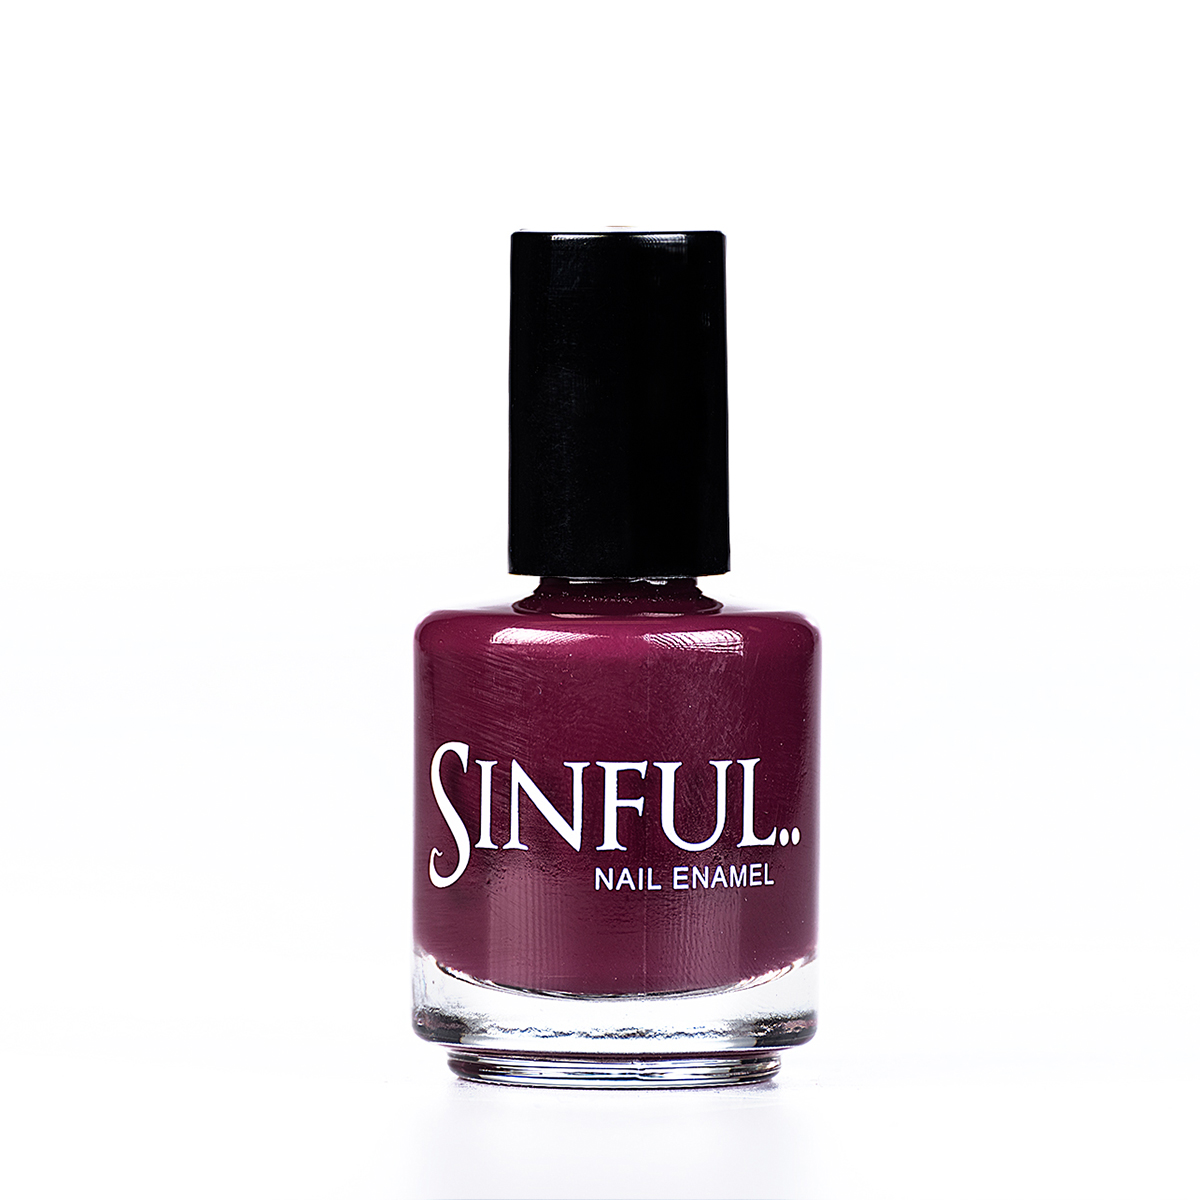 A gorgeous solid mulberry shade, the colour of an uprising star. Sinful always recommends applying two coats of polish to give a solid colour, then applying top coat to extend the wear-time of the polish. 15ml